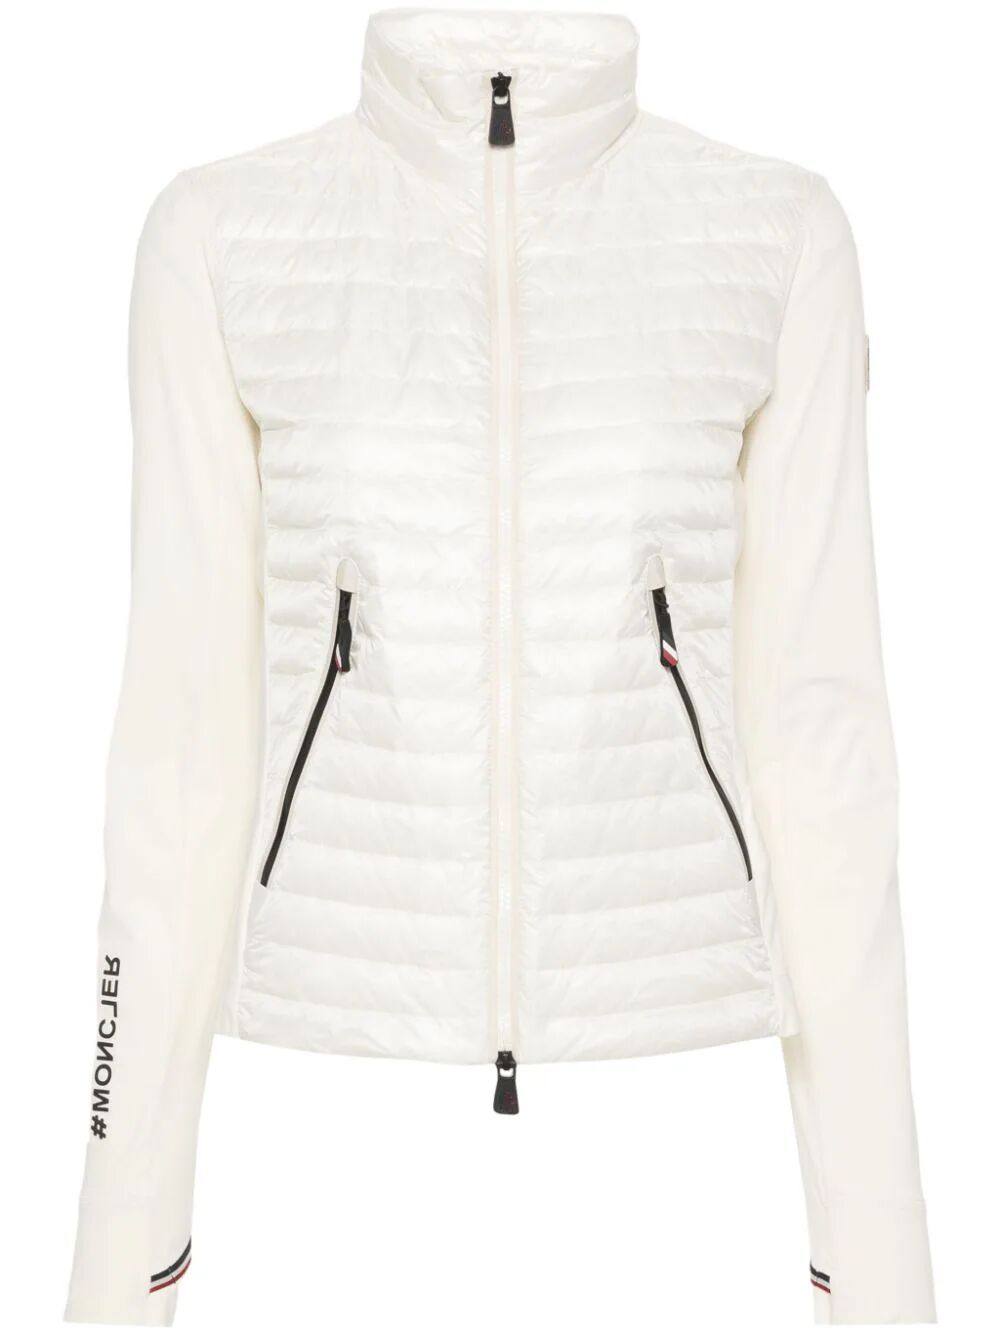 MONCLER White Padded Zip Sweatshirt for Women - SS24 Collection